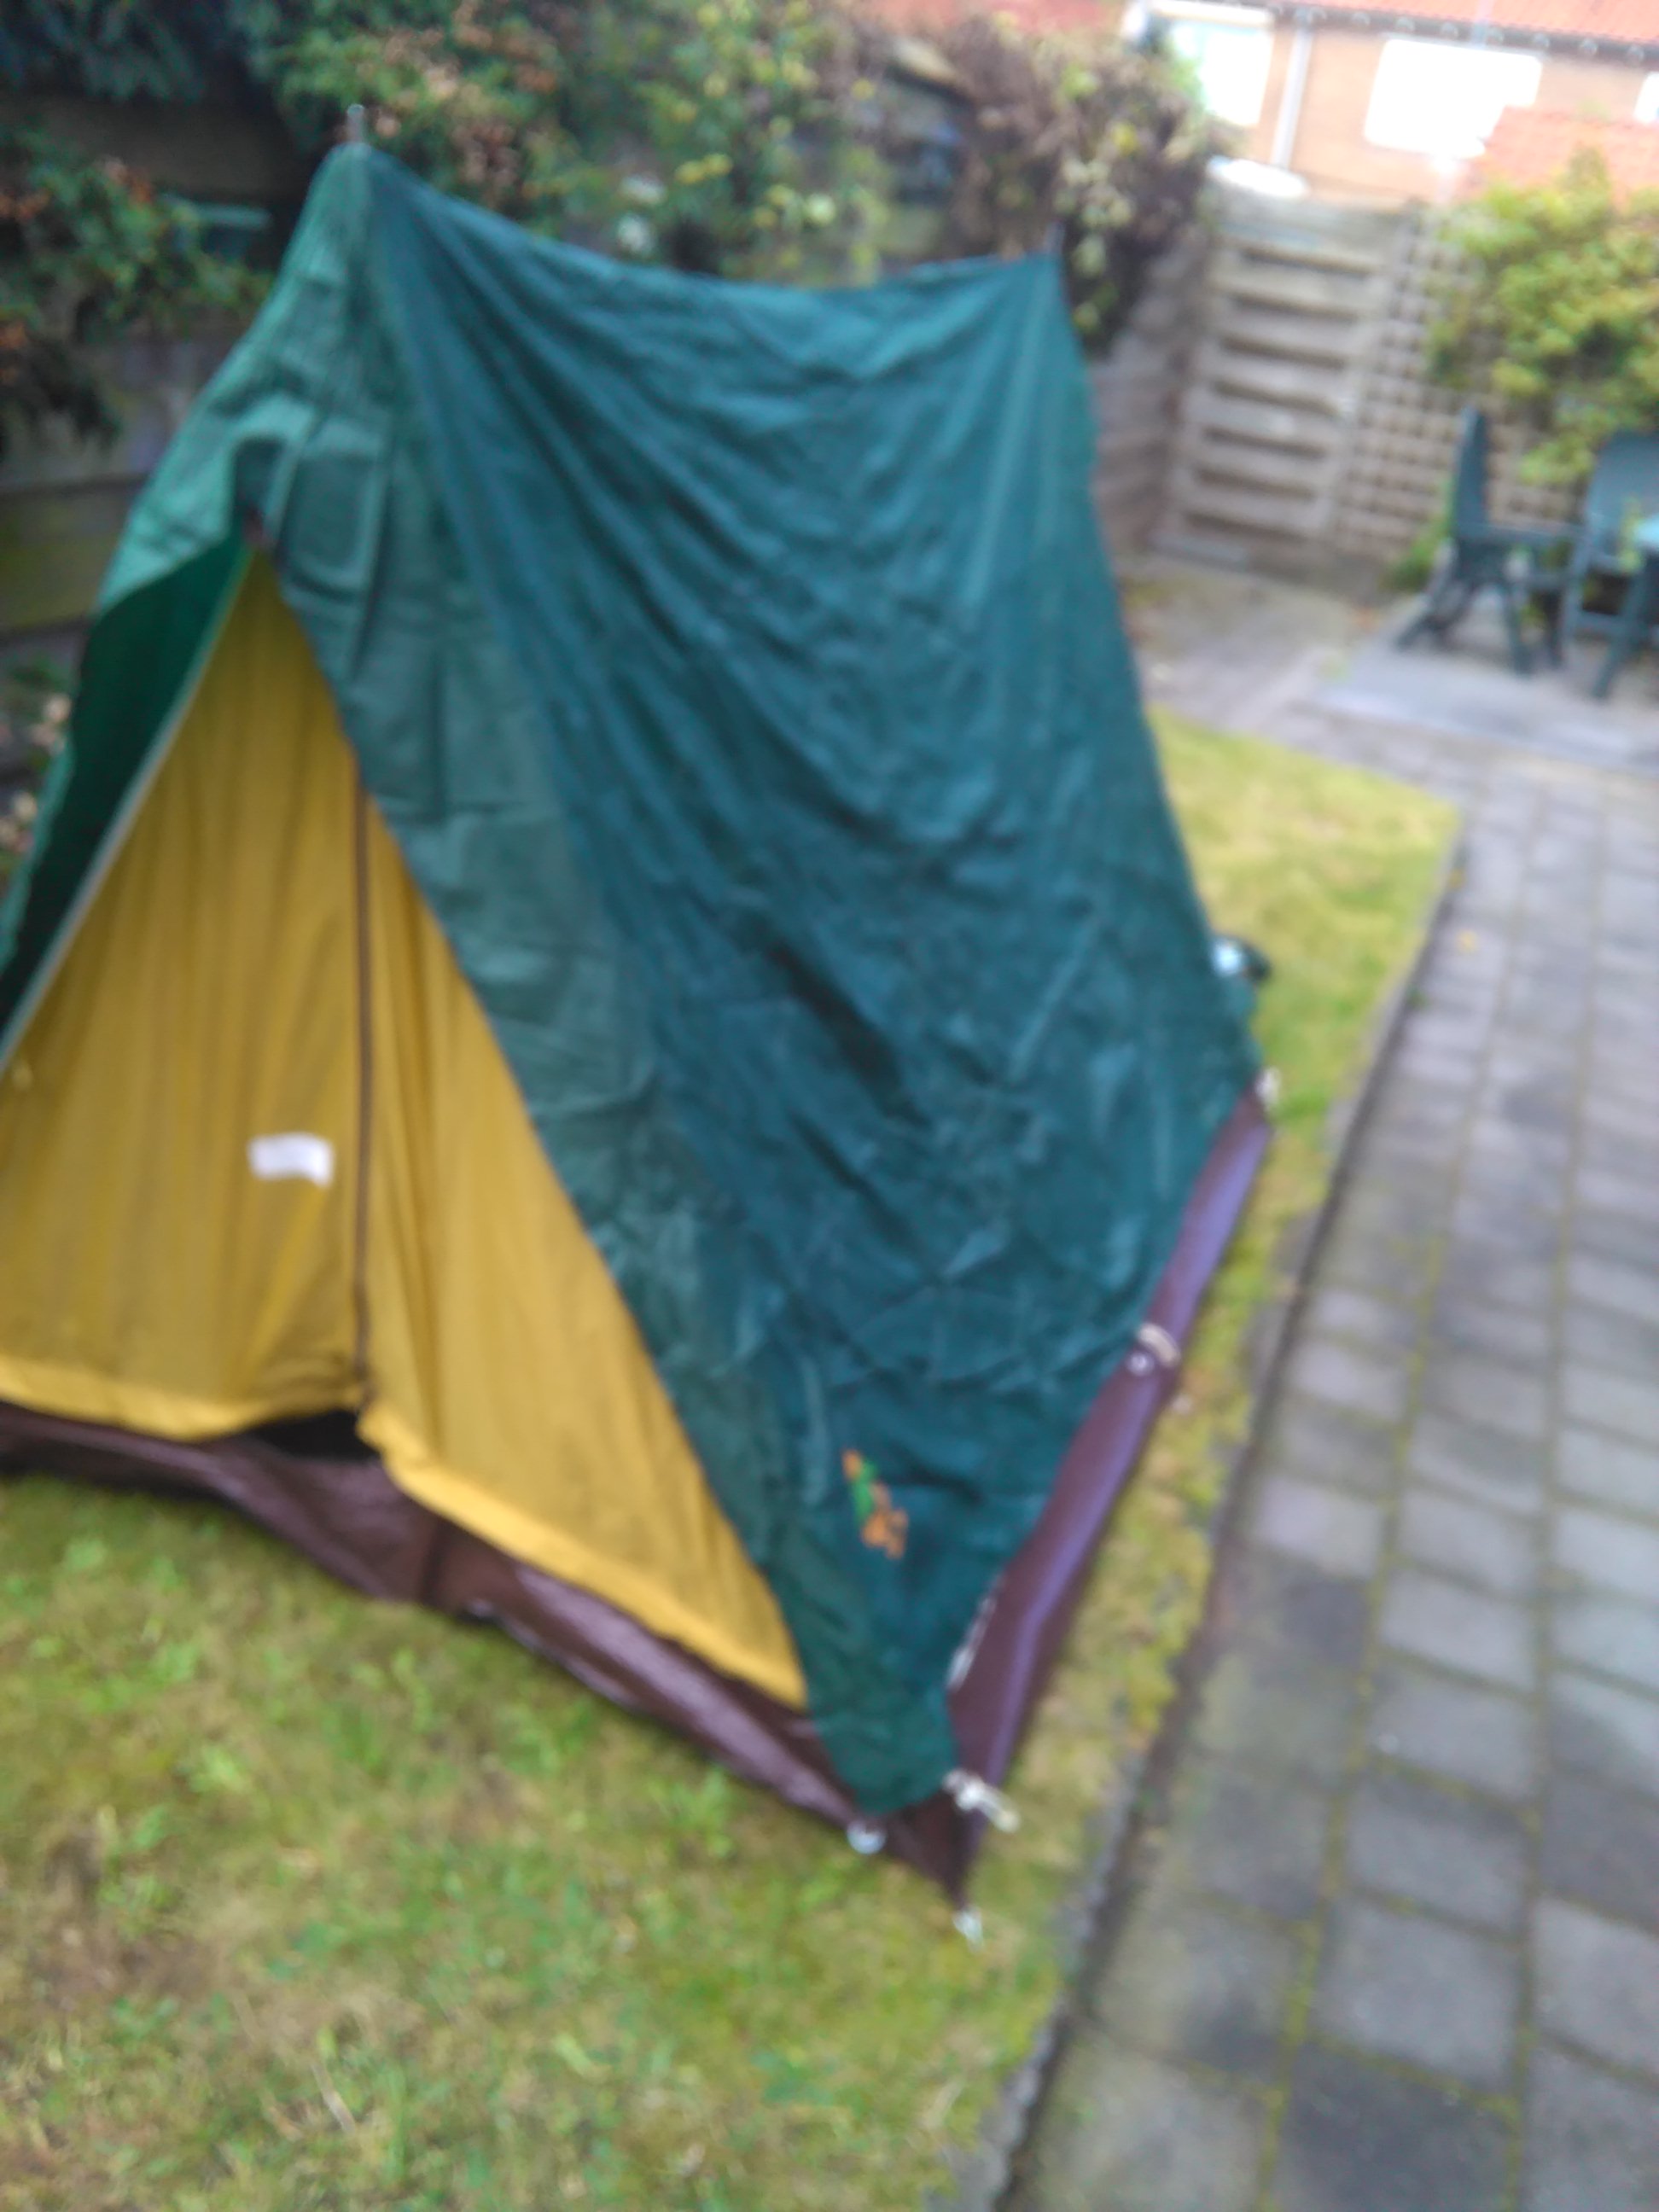 Partially Erected Tent